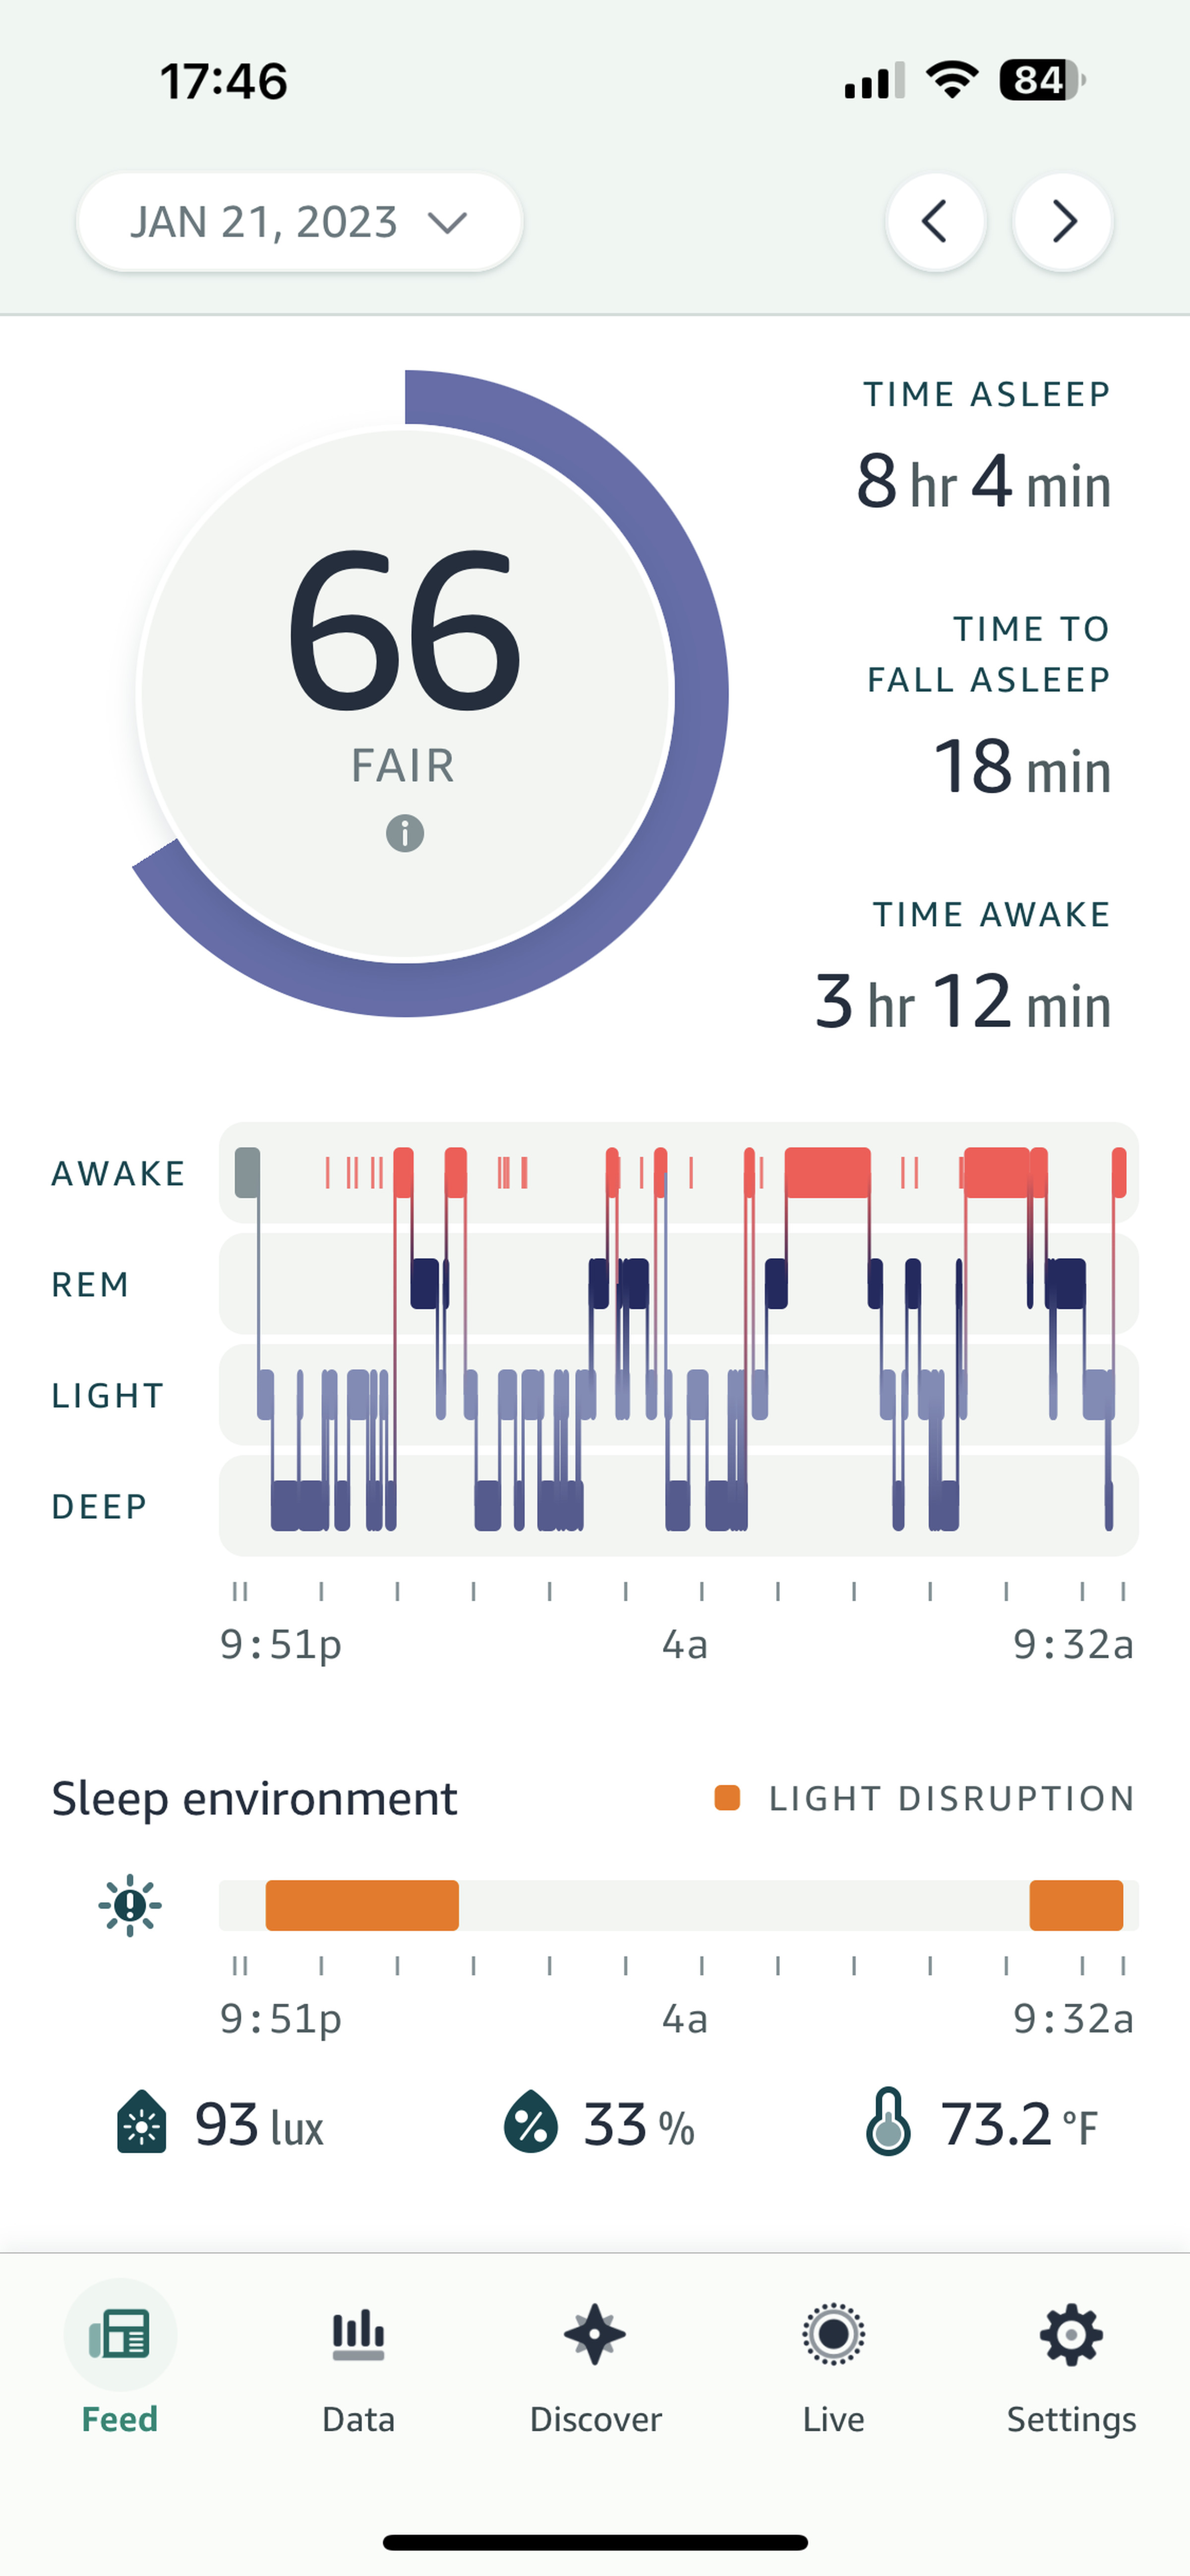 Amazon Halo app showing a fair sleep score of 66 with 3 hours, 12 minutes of awake time.